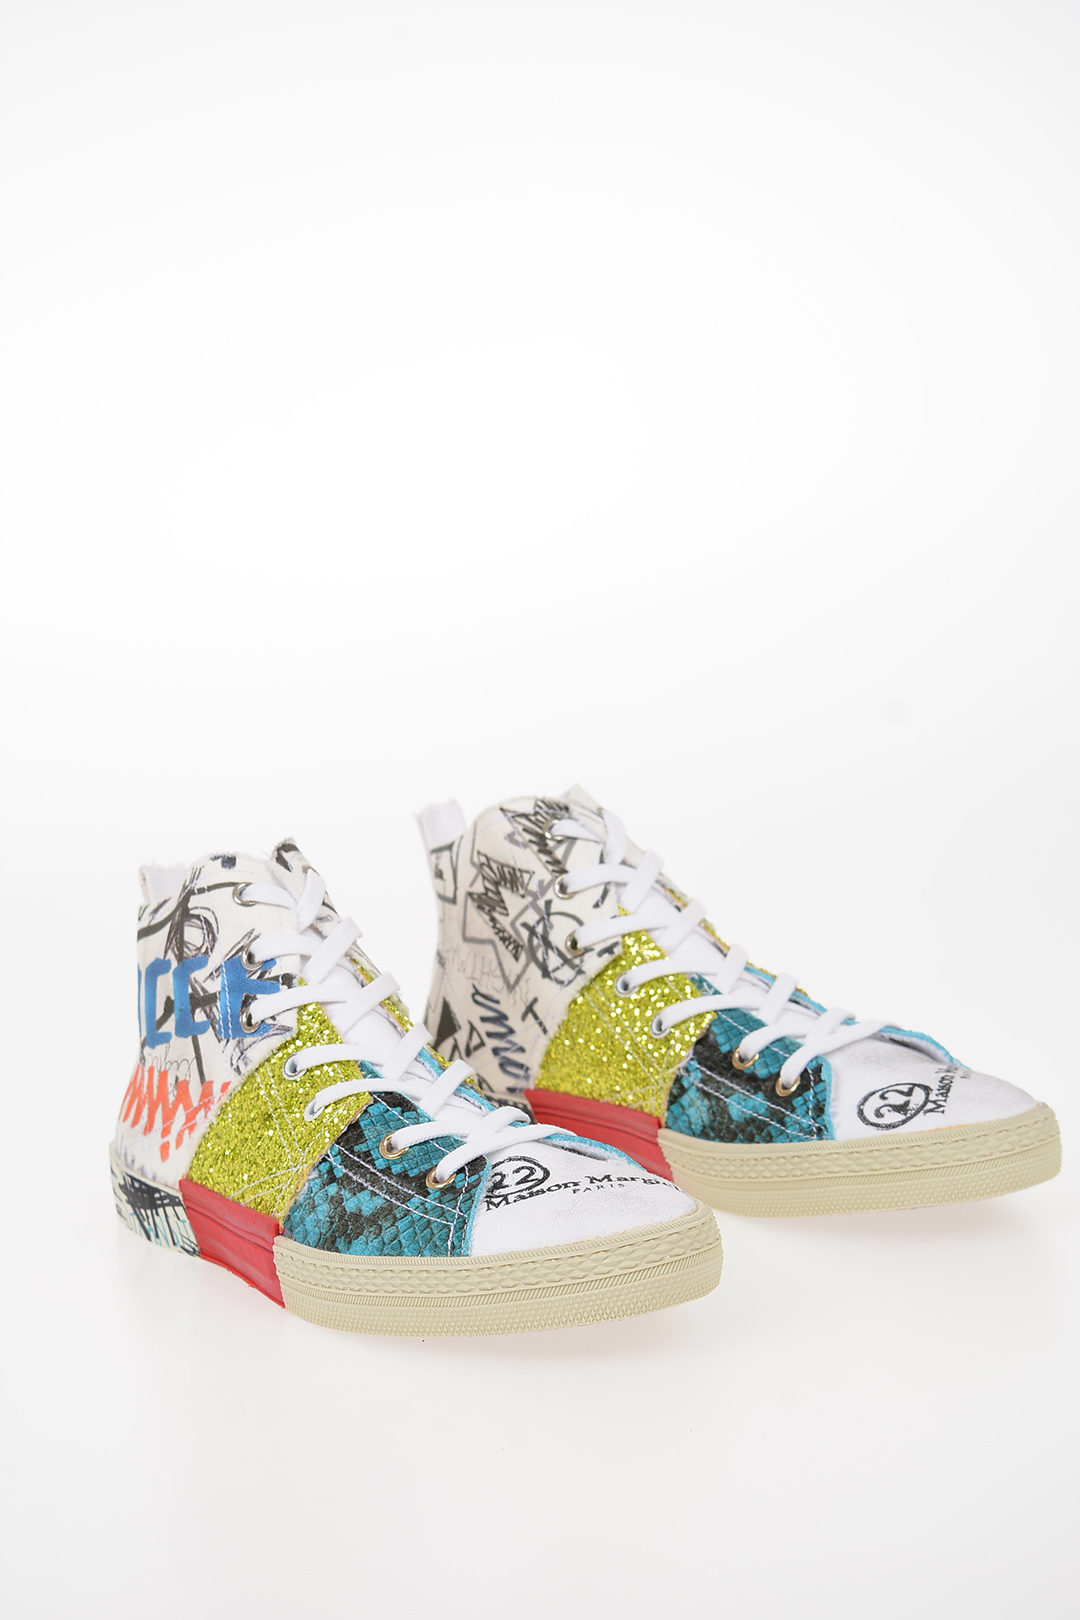 MM22 Multicolor Logo and Graffiti Canvas High-Top Sneakers